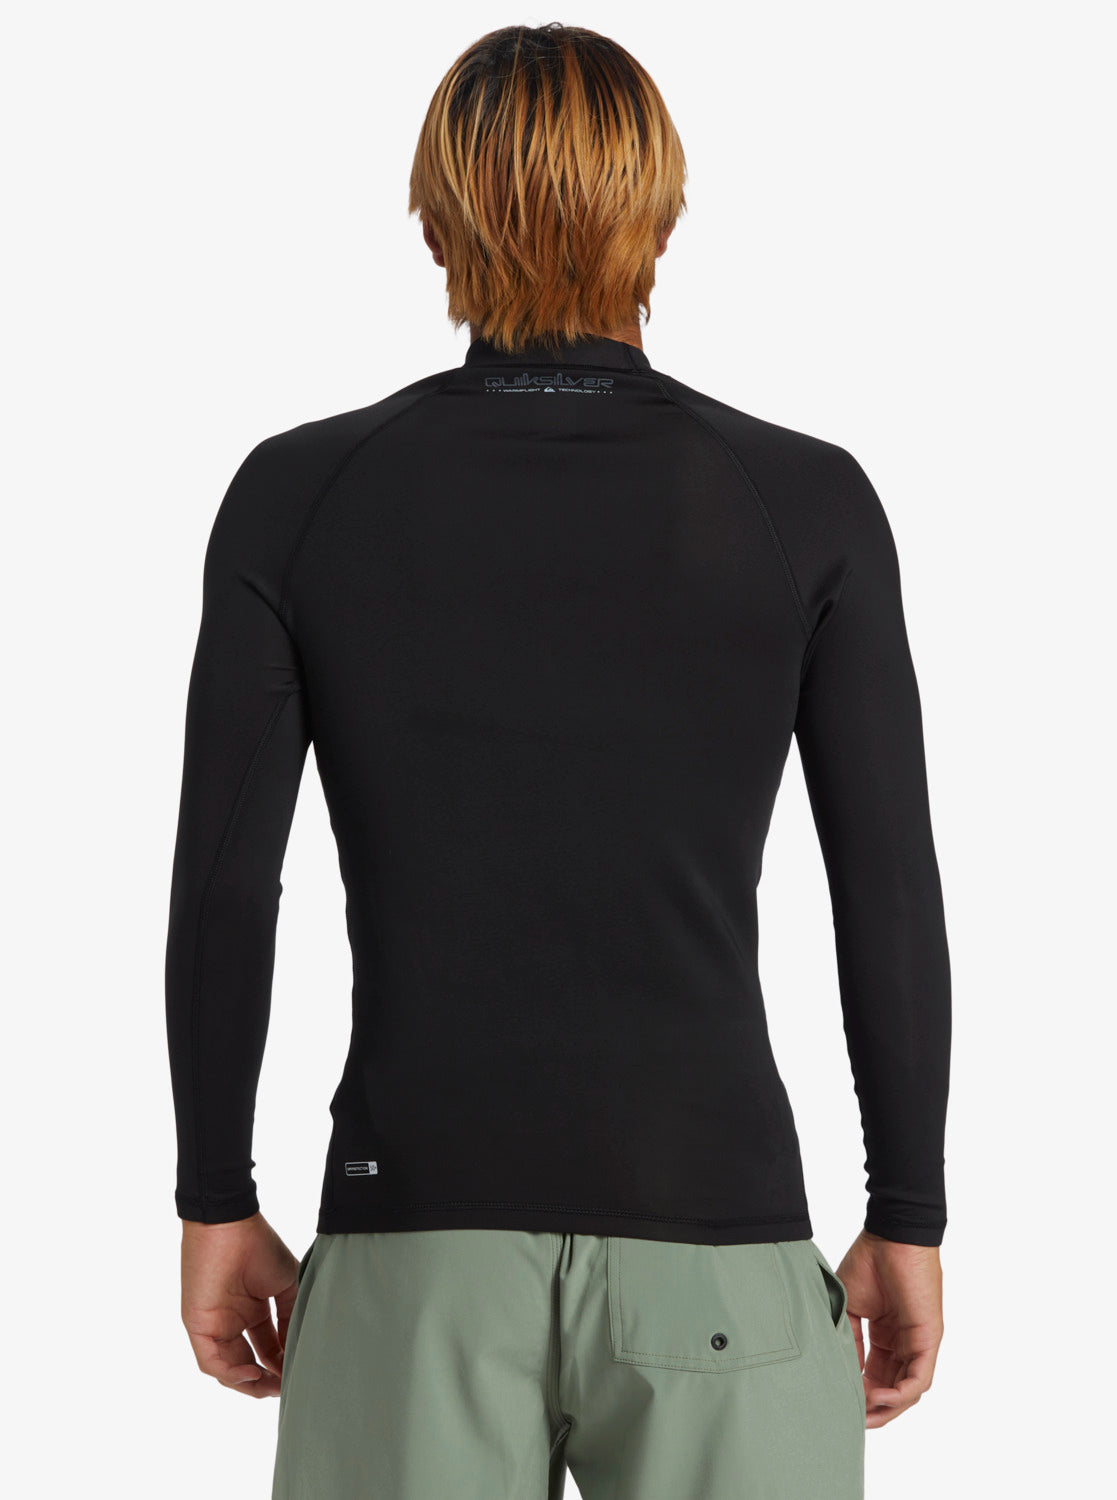 Quiksilver Everyday Heat LS Thermal Rash Top in black from rear